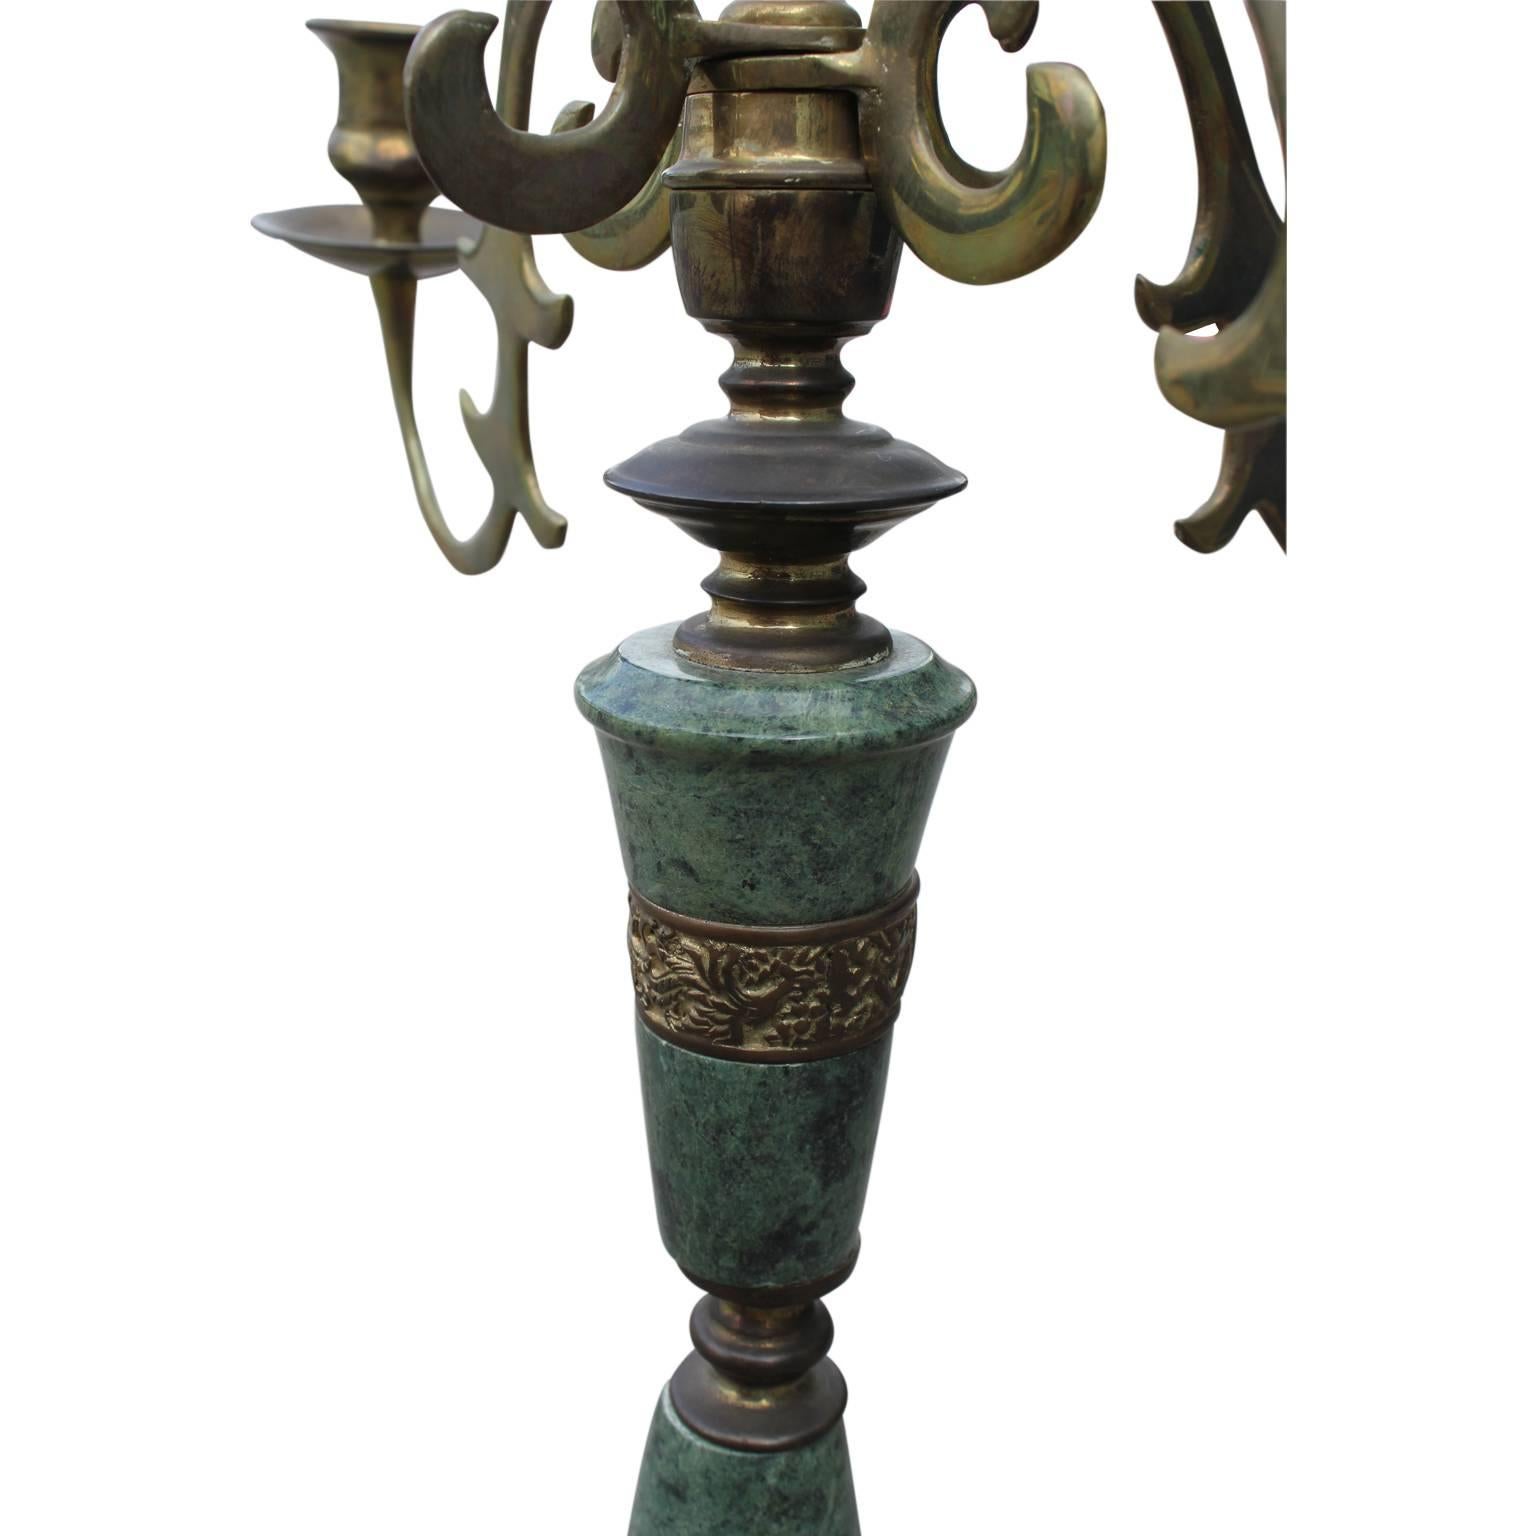 Green marble and brass candelabra with and Asian or Oriental inspiration.